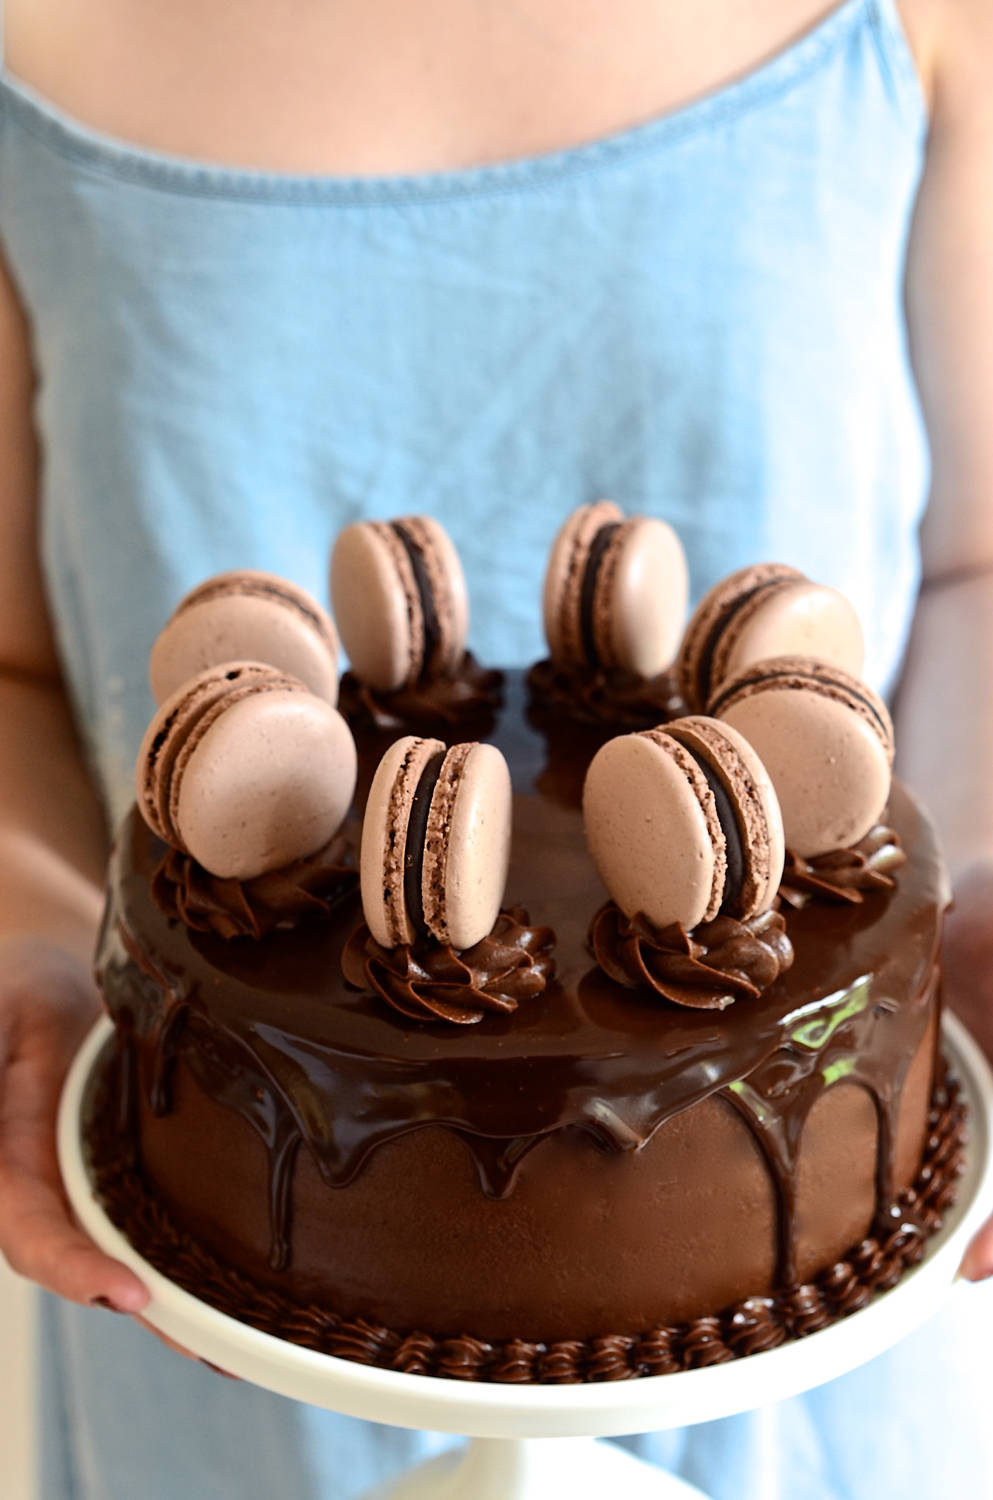 Delicious Dark Chocolate Cake with Macarons Wallpaper